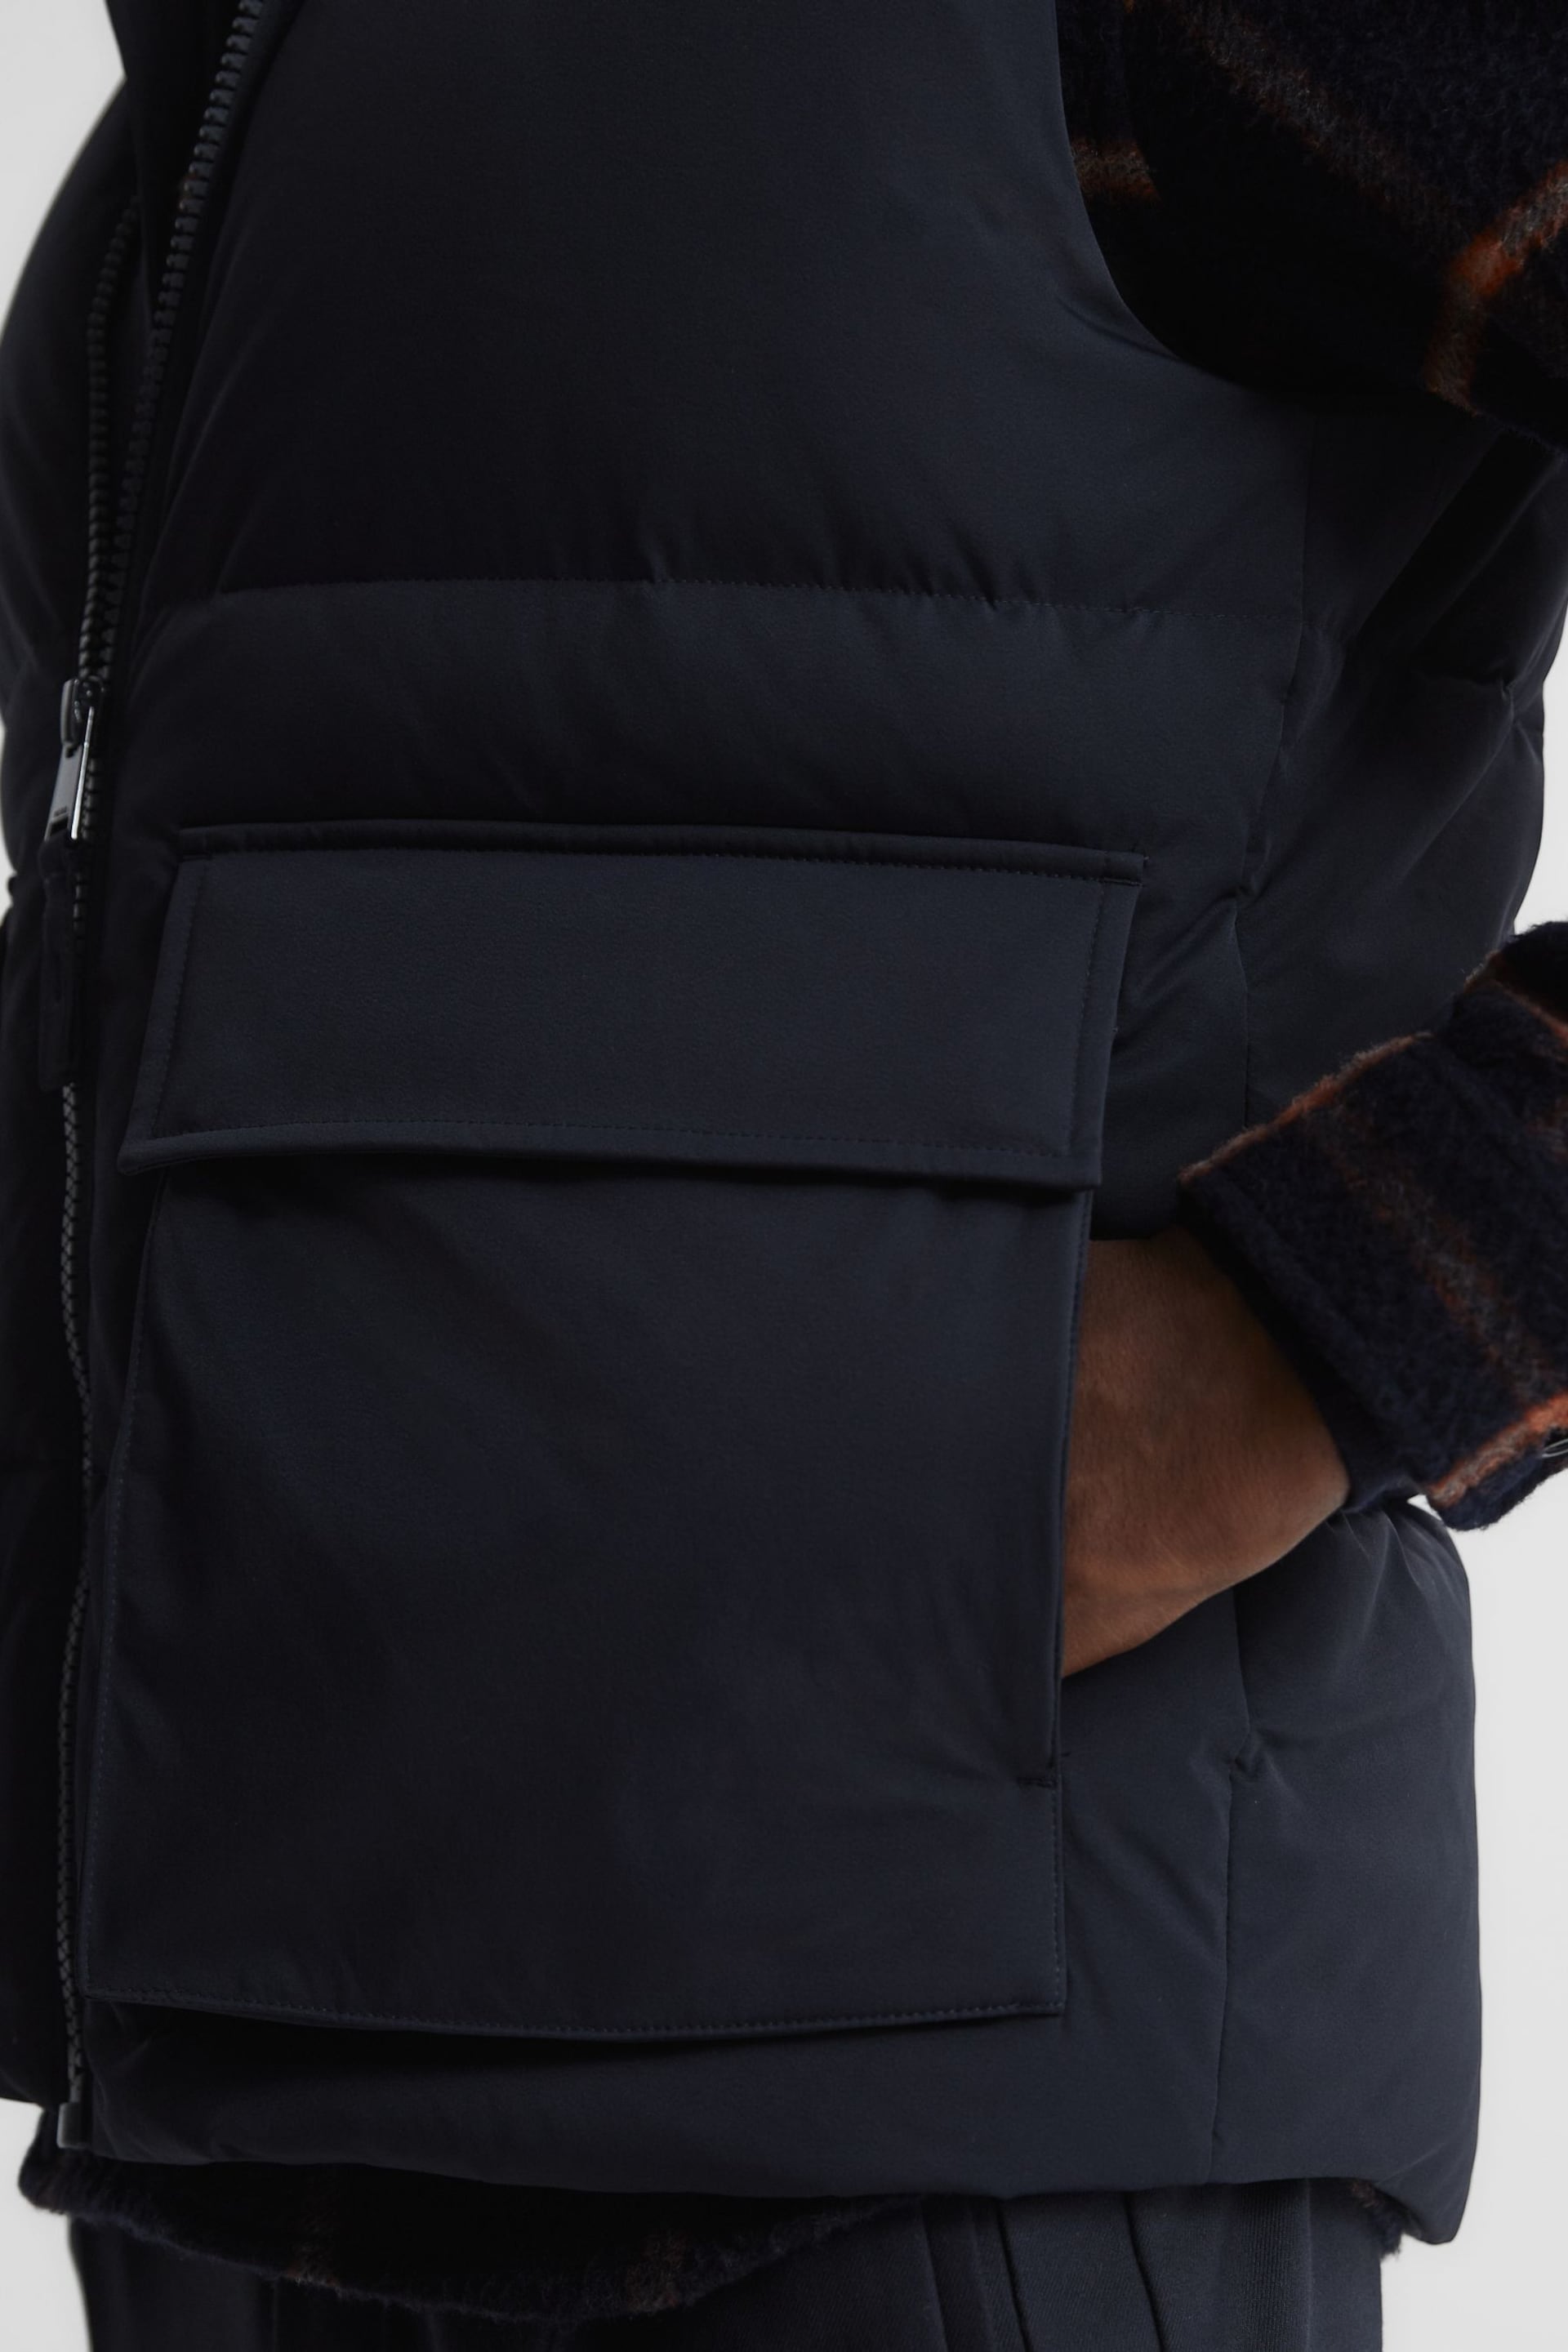 Reiss Navy Westbrook Funnel Neck Puffer Gilet - Image 6 of 7